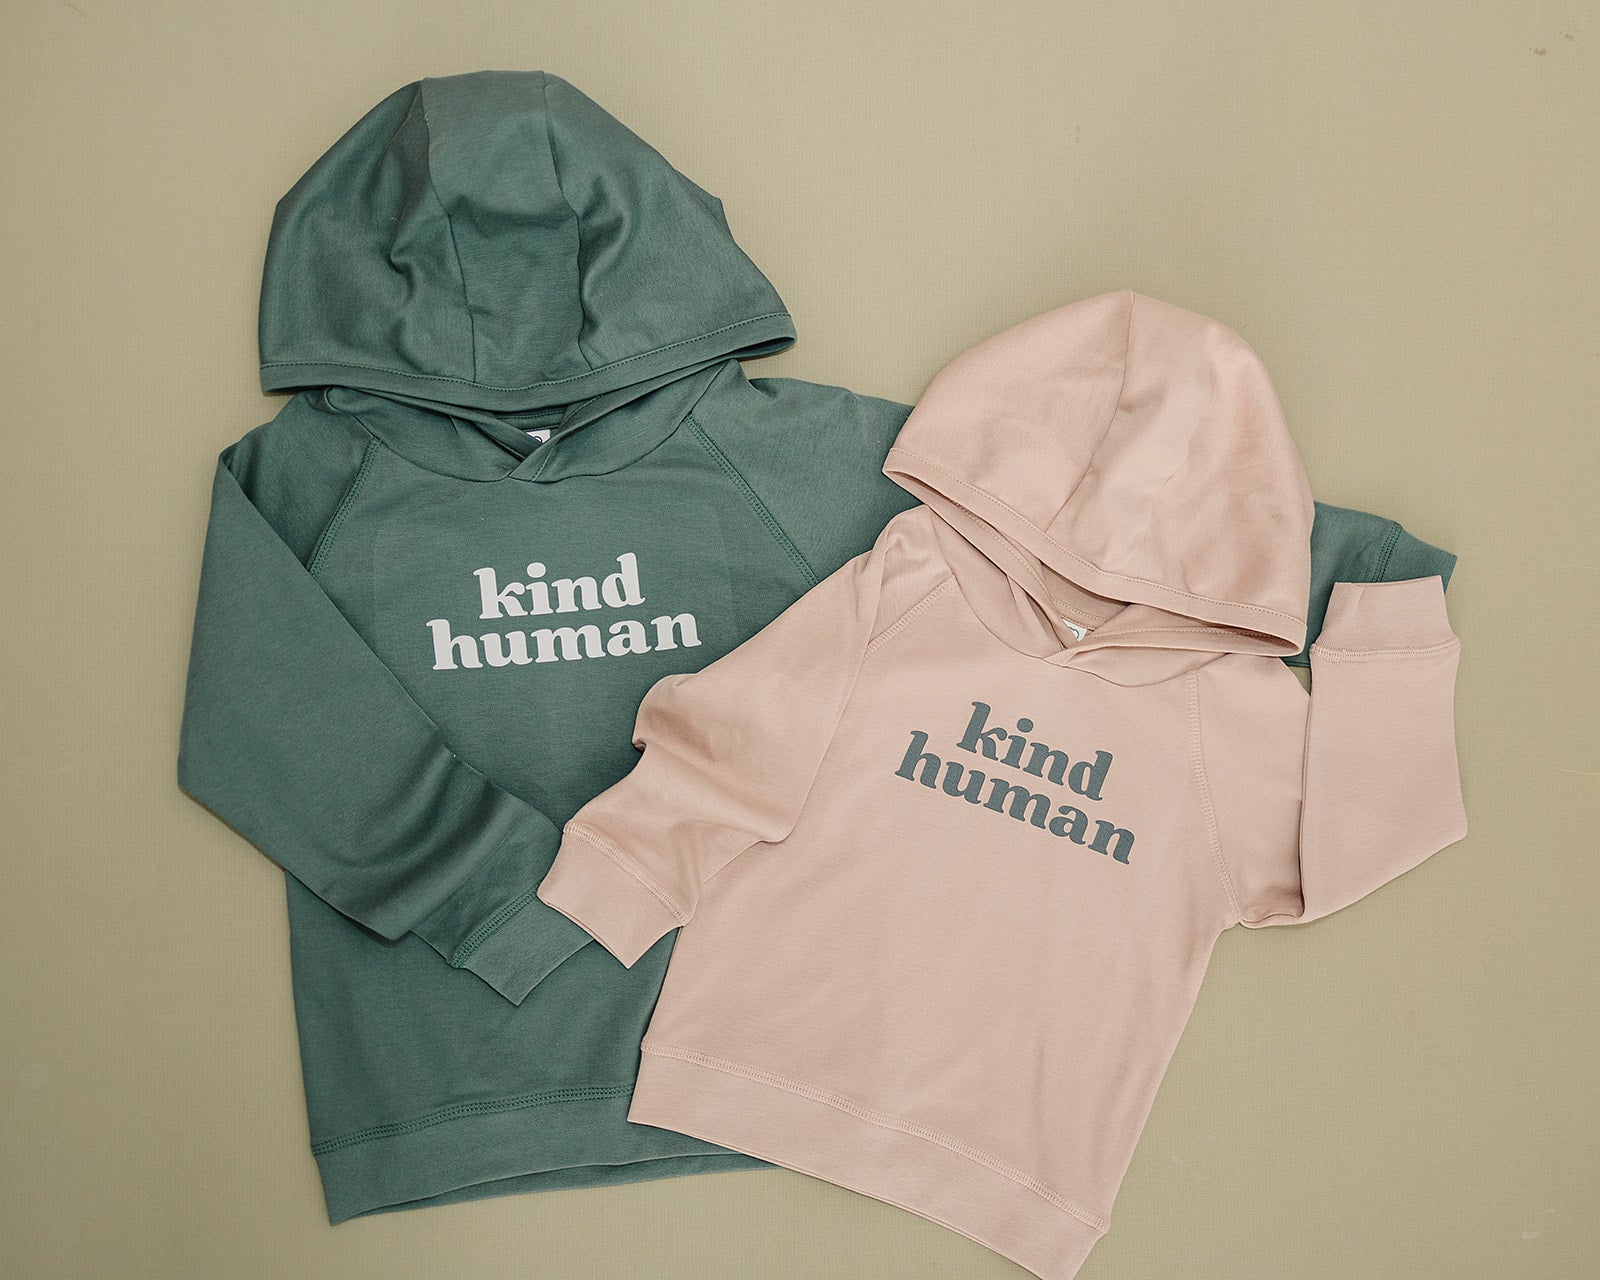 Olive green and blush pink 'kind human' hoodies laid flat on a sage background with a cozy and minimalist vibe